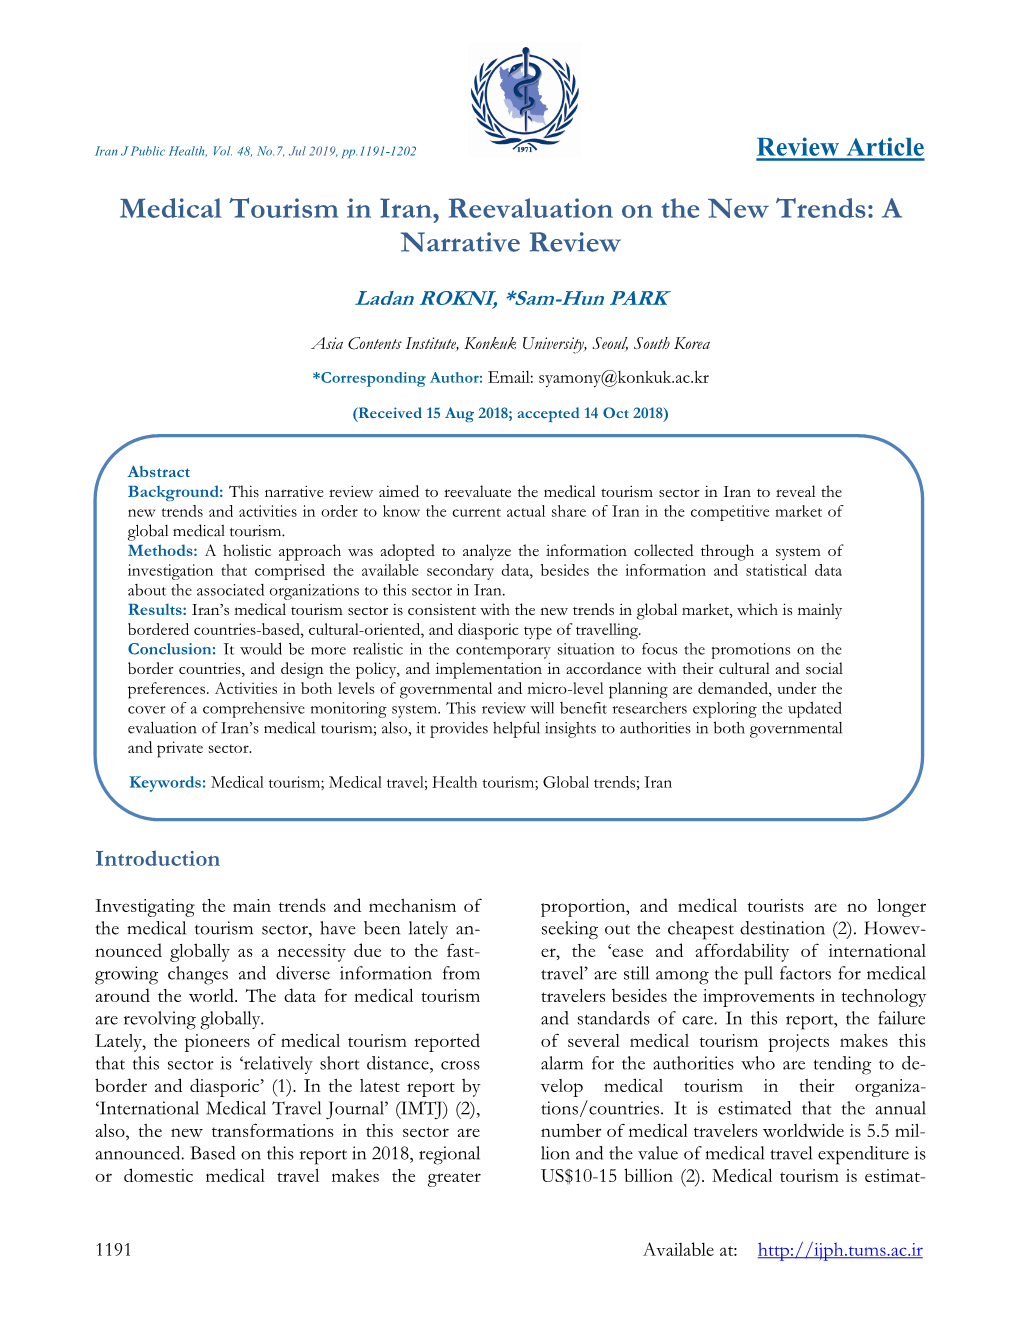 Medical Tourism in Iran, Reevaluation on the New Trends: a Narrative Review